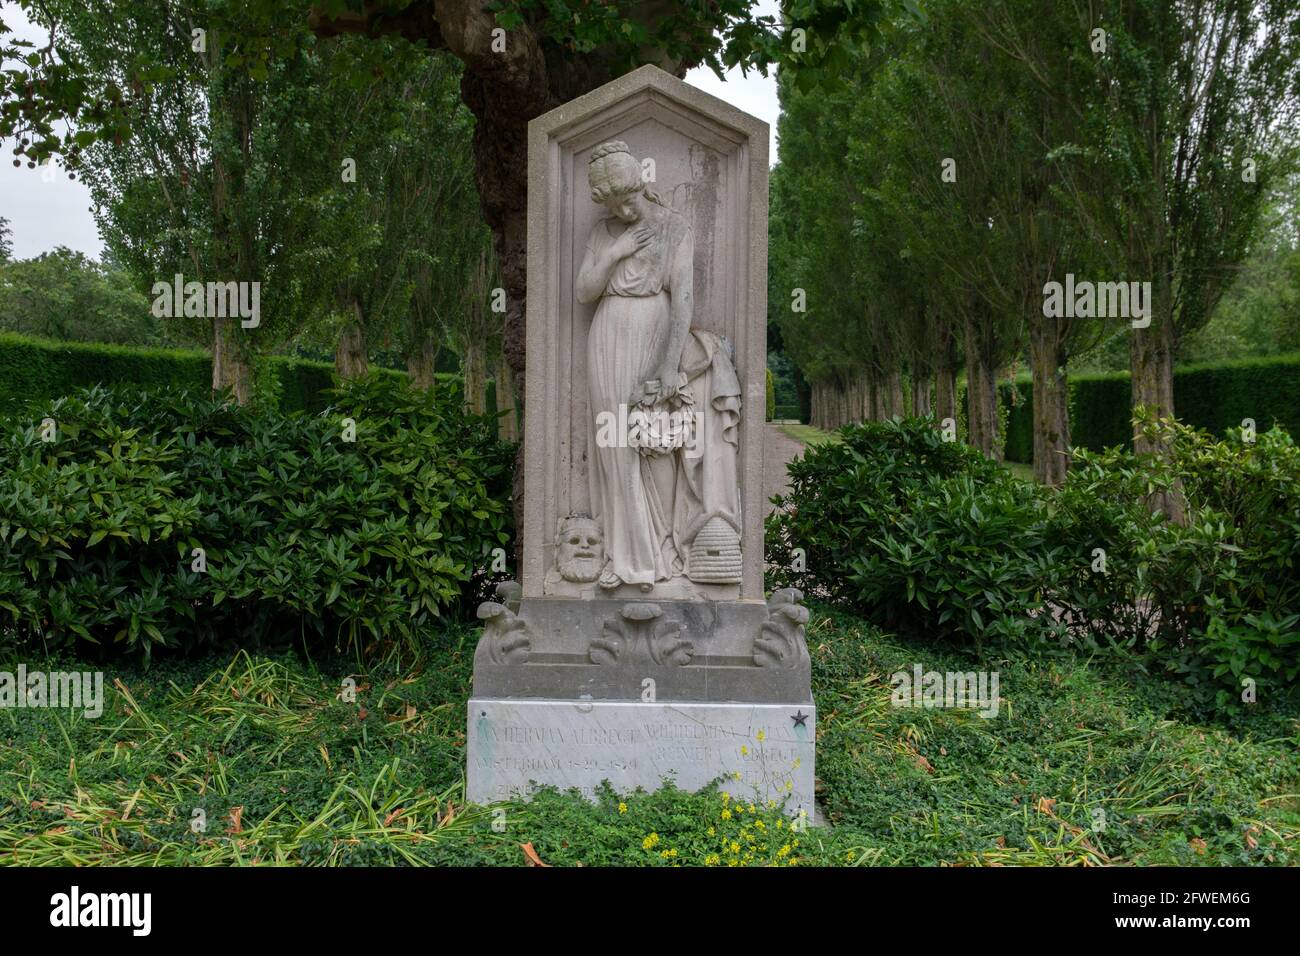 Tombstone Jan Albregt At Amsterdam The Netherlands 11-7-2019 Stock Photo